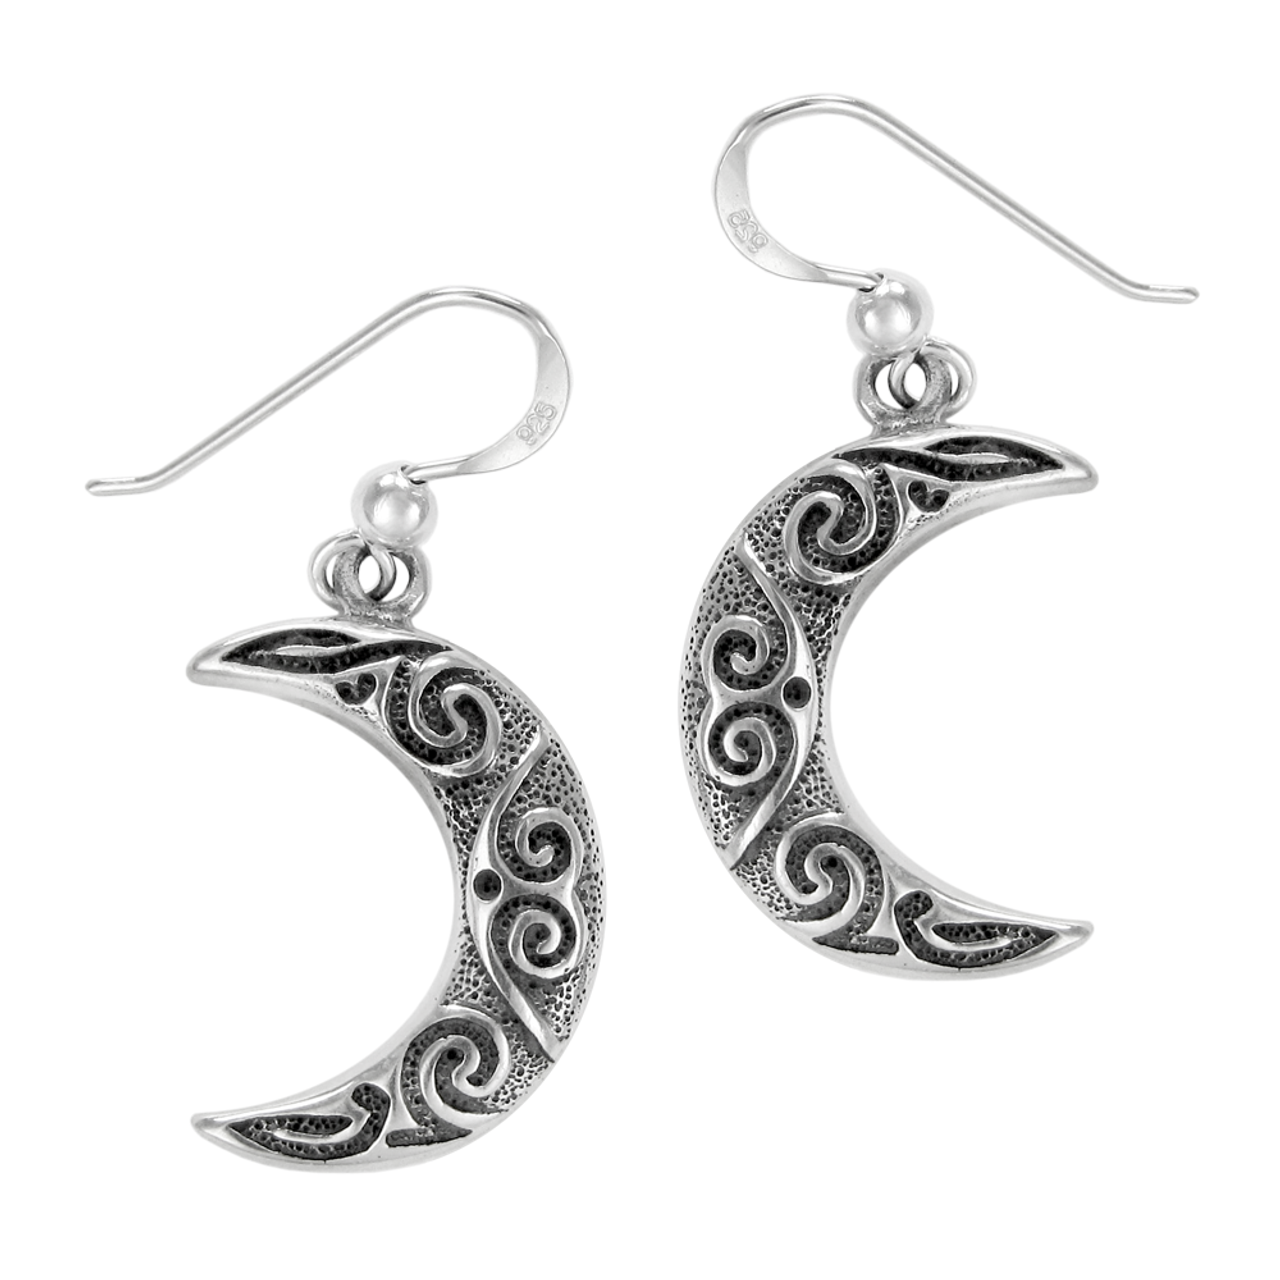 Crescent Moon and Northern Star Earring Set For Ear Stacking Idea